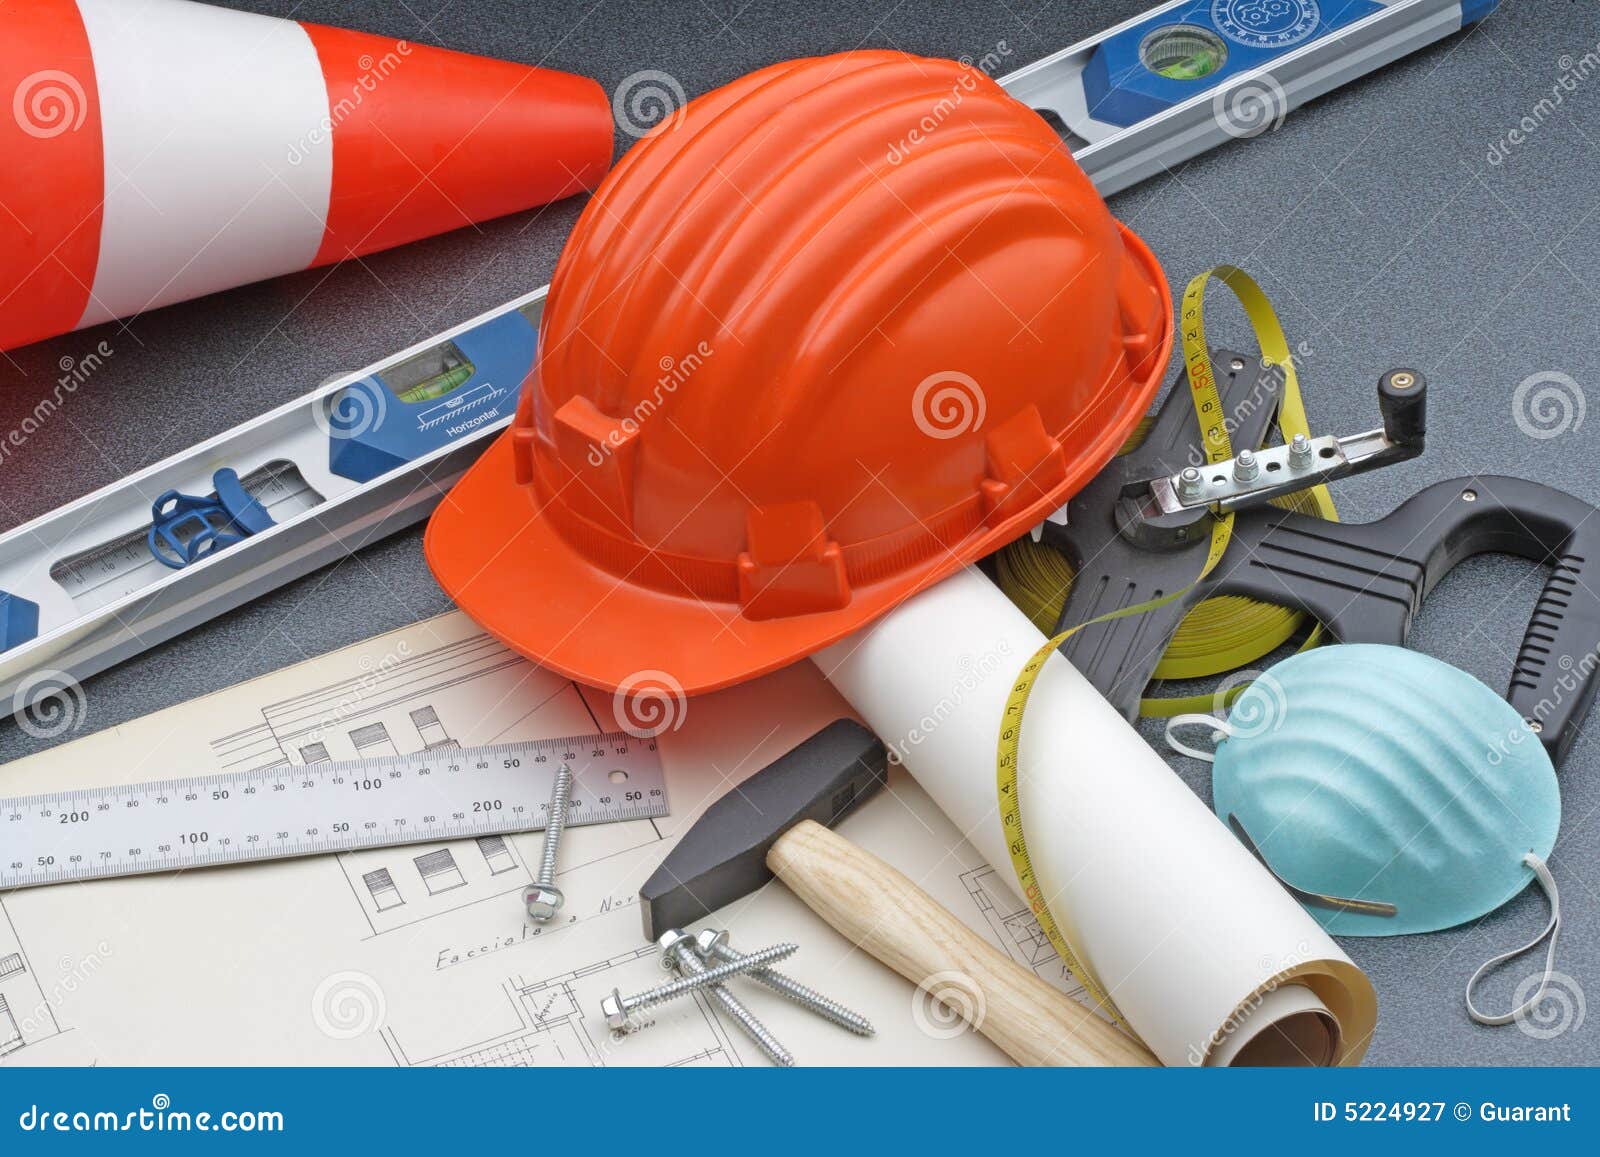 construction safety tools